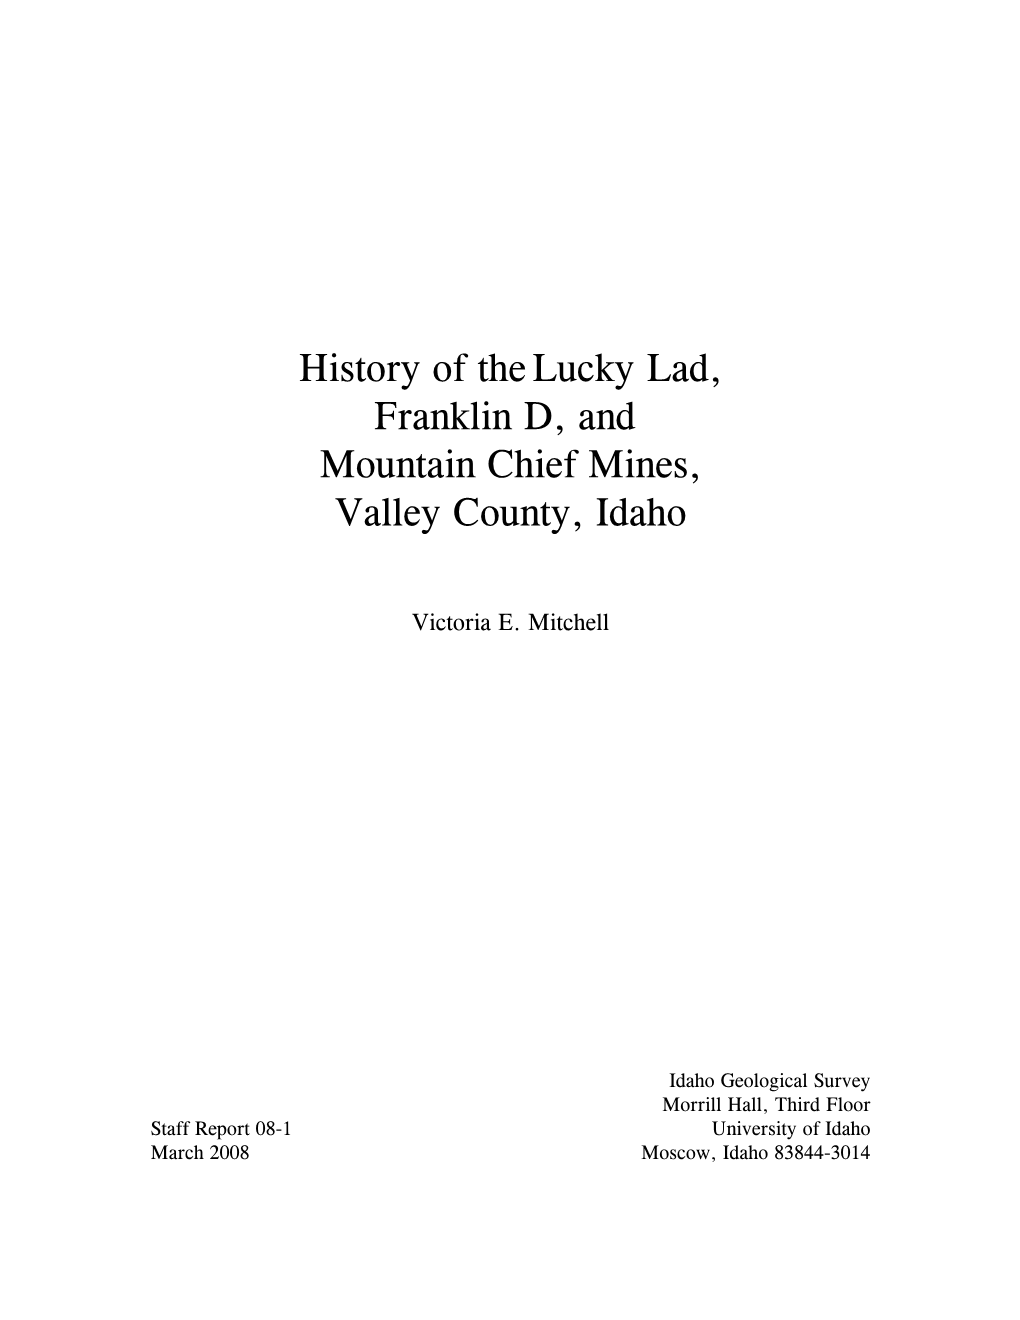 History of the Lucky Lad, Franklin D, and Mountain Chief Mines, Valley County, Idaho